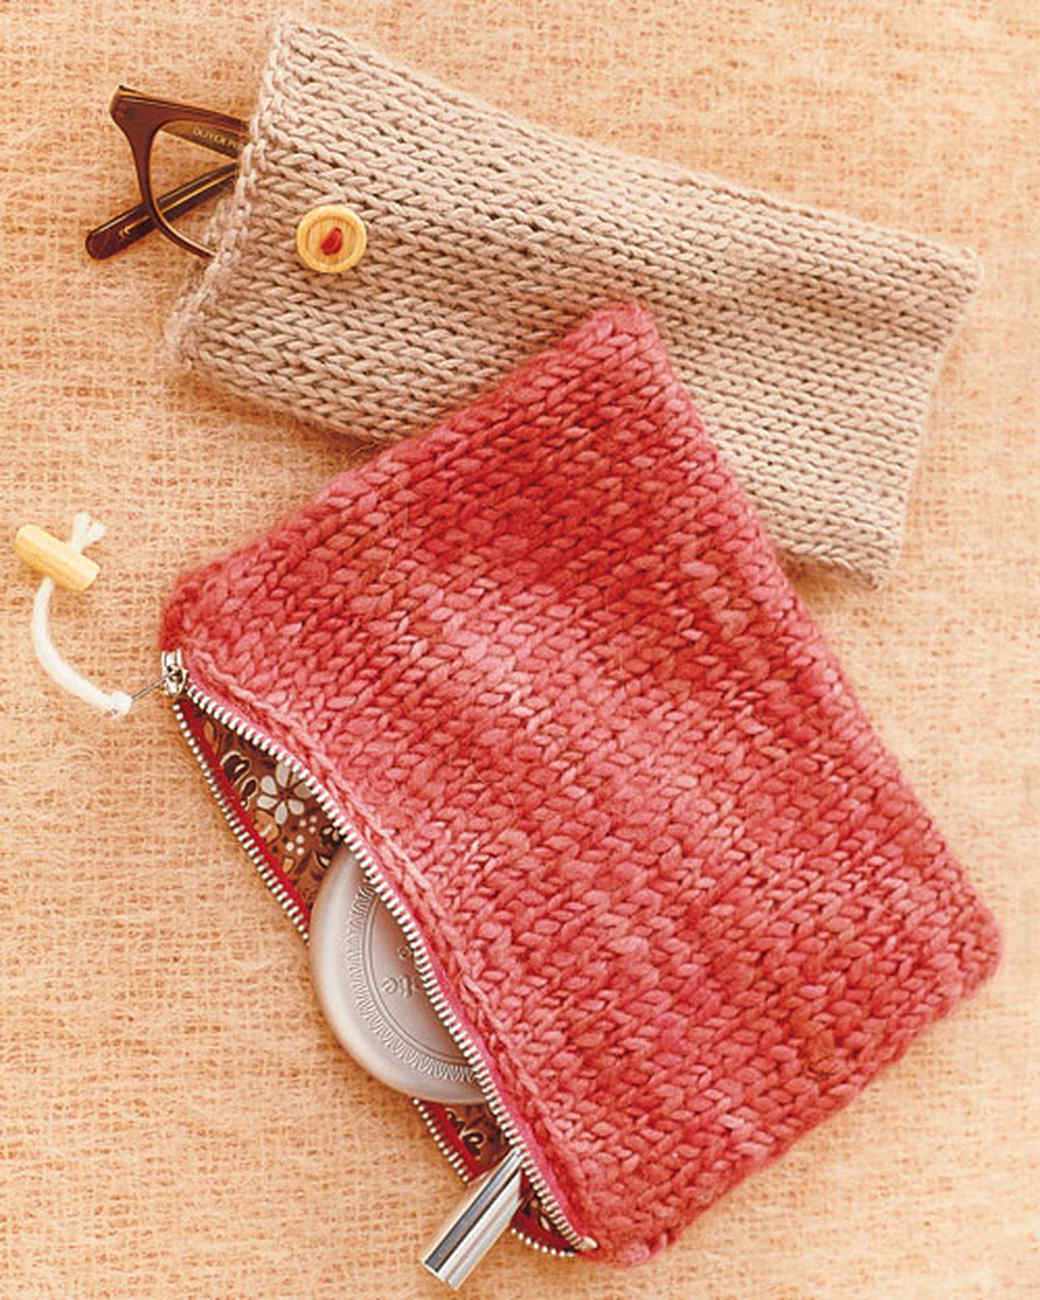 Knitted Phone & Wallet Bag Small Brown Knitted Wool Bag with Finger Woven Strap